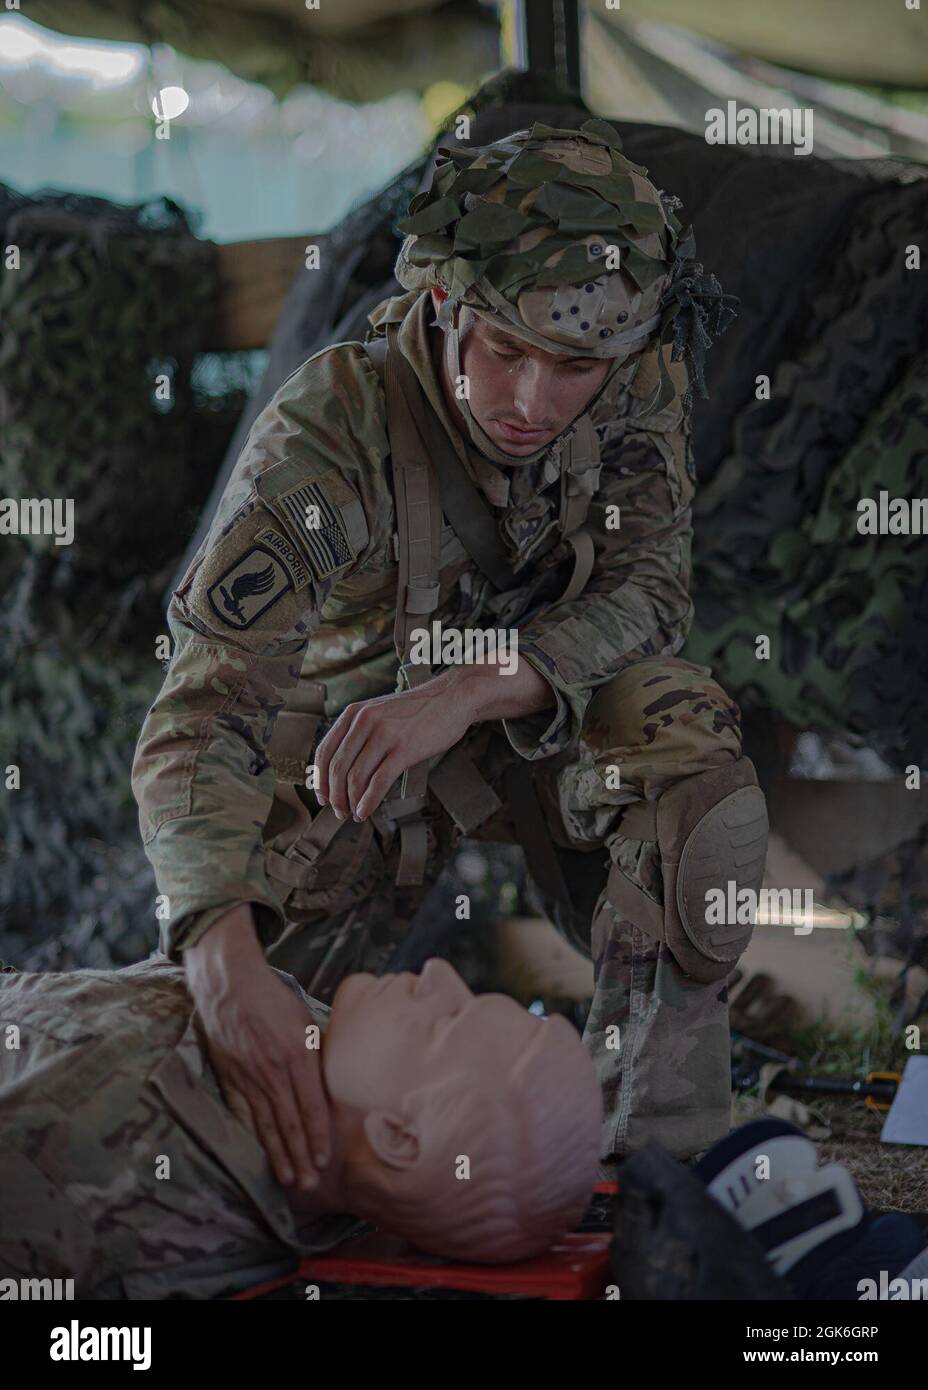 A U.S. Army paratrooper assigned to the 173rd Airborne Brigade completes a medical task during the Expert Infantryman Badge (EIB) testing on August, 15 2021 at Caserma Del Din, Italy. Earning the coveted Expert Infantryman Badge (EIB) / Expert Soldier Badge (ESB) displays Soldiers' proficiency in their specialty and sets them apart from their peers.    The 173rd Airborne Brigade is the U.S. Army’s Contingency Response Force in Europe, providing rapidly deployable forces to the United States European, Africa and Central Command areas of responsibility. Forward deployable across Italy and German Stock Photo